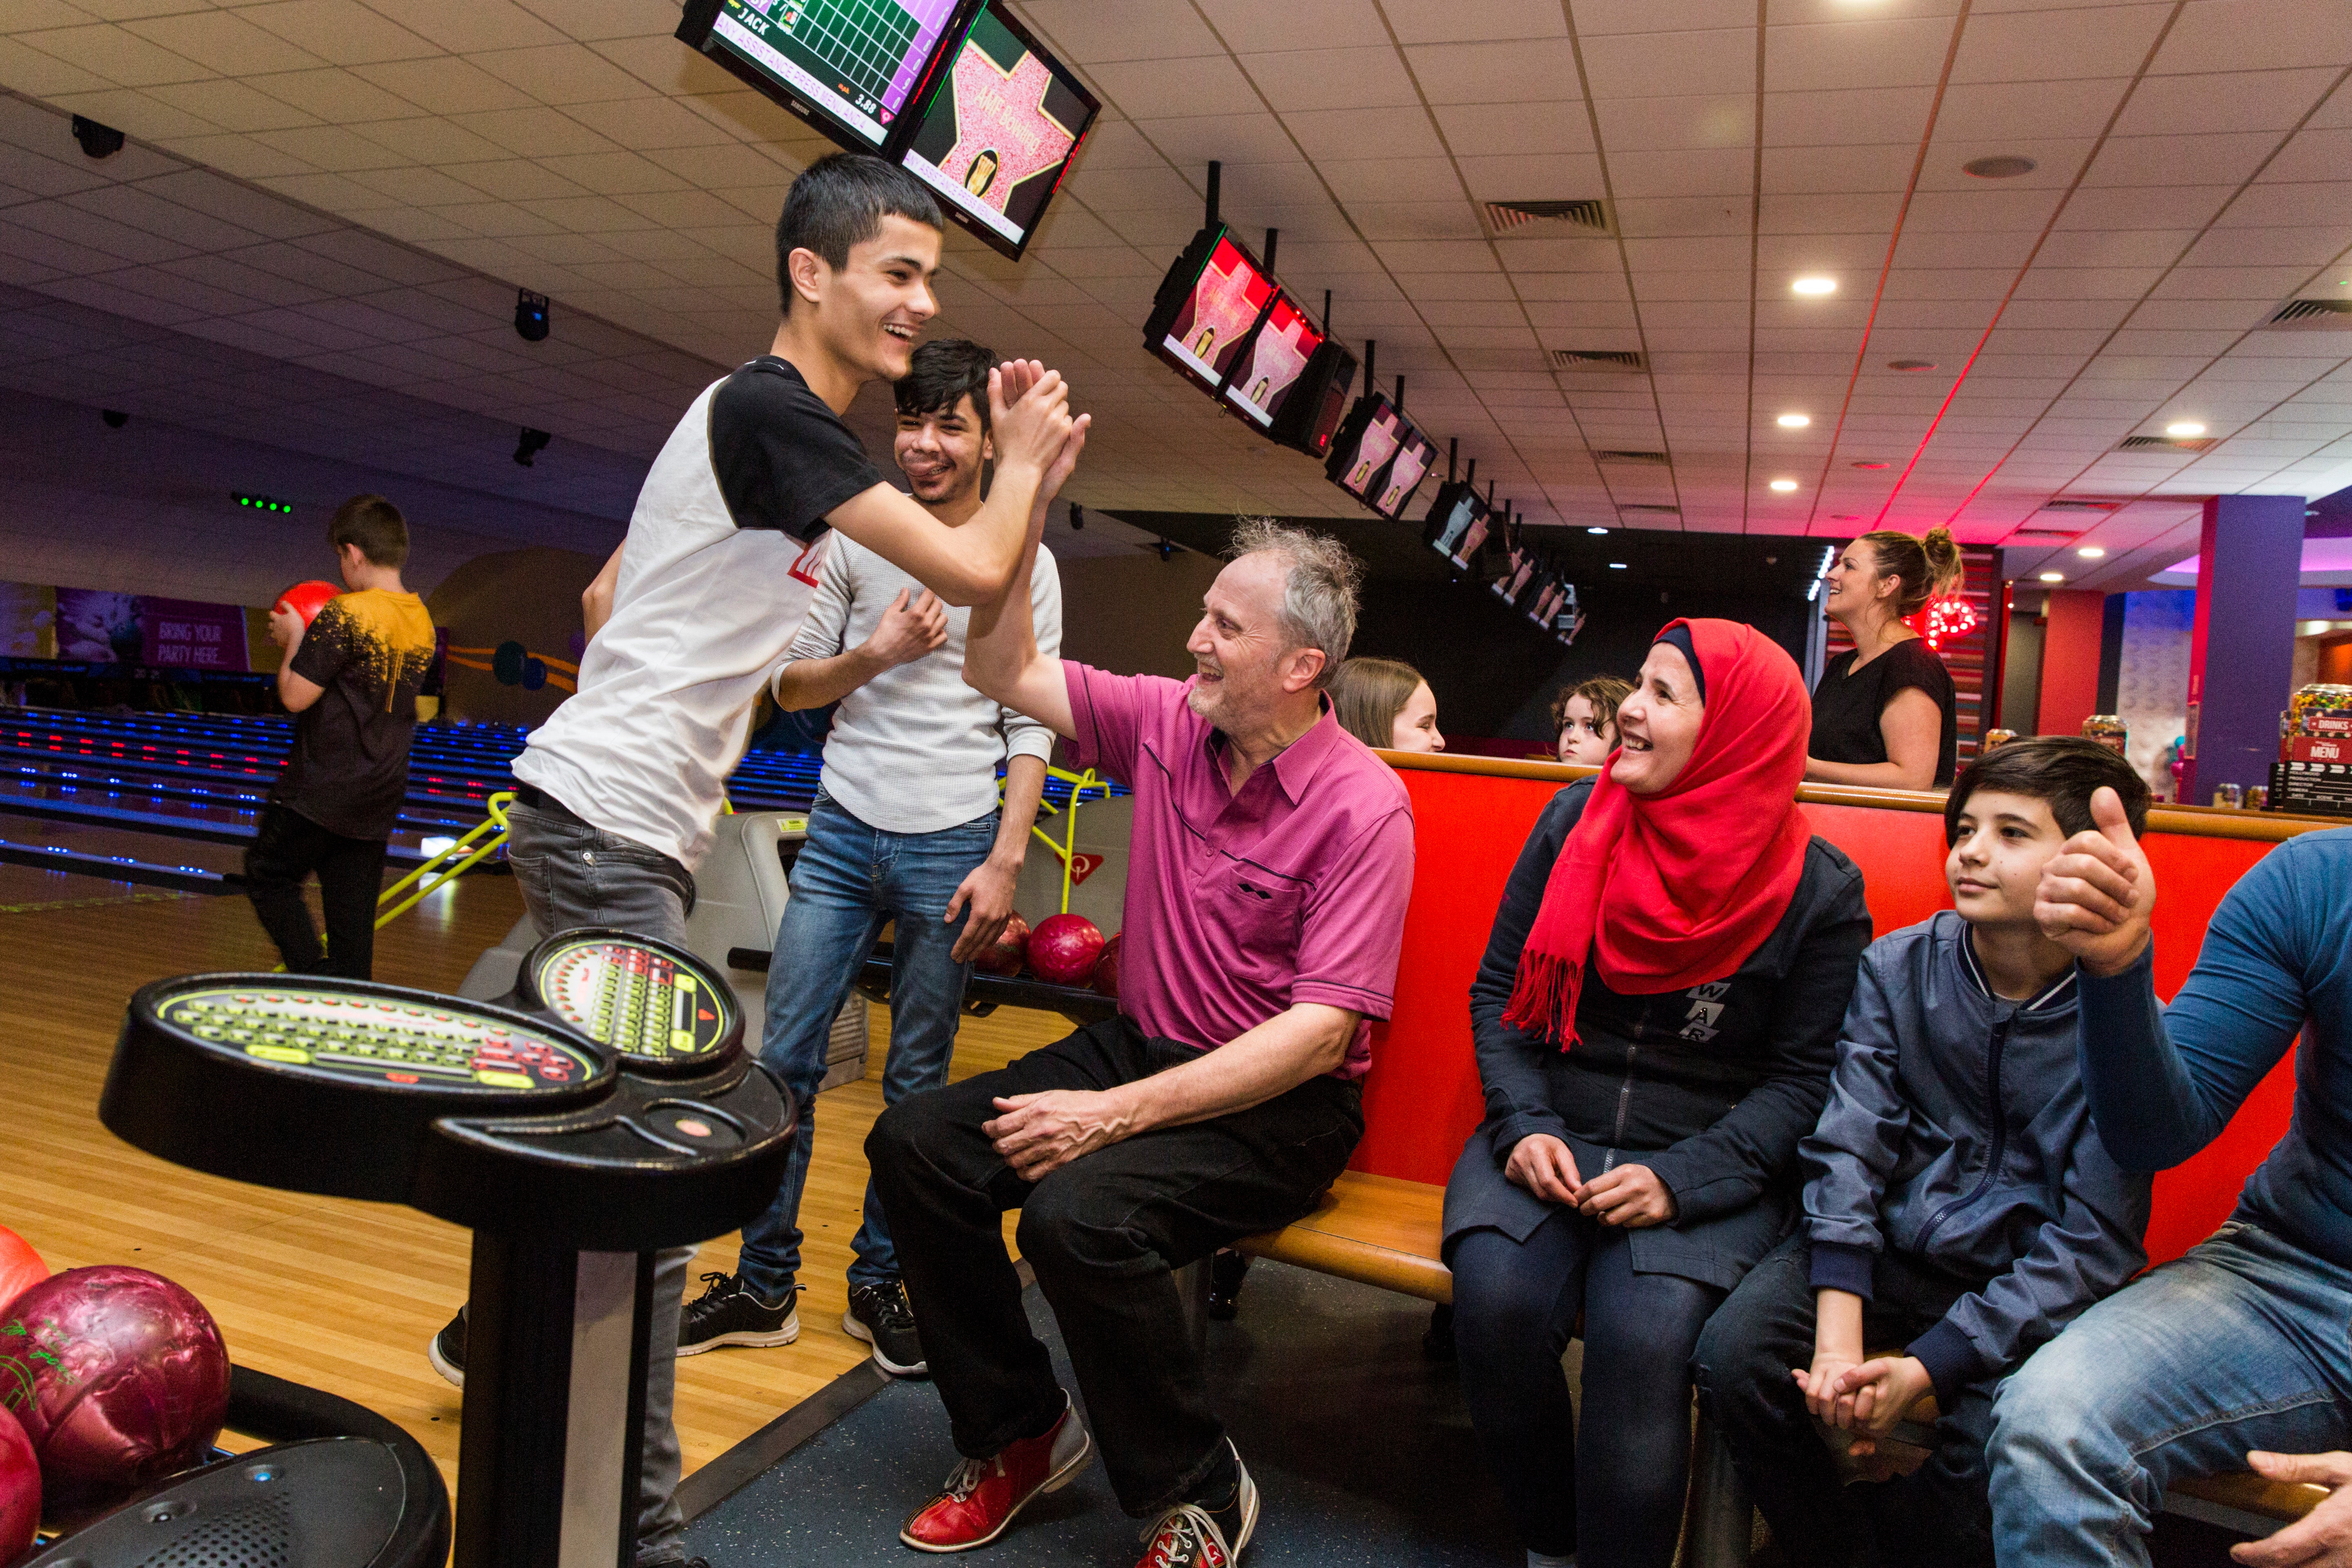 Sixteen-year-old Haitham Daour gives Ged Cavanagh a high five after a strike at a bowling alley in Bury